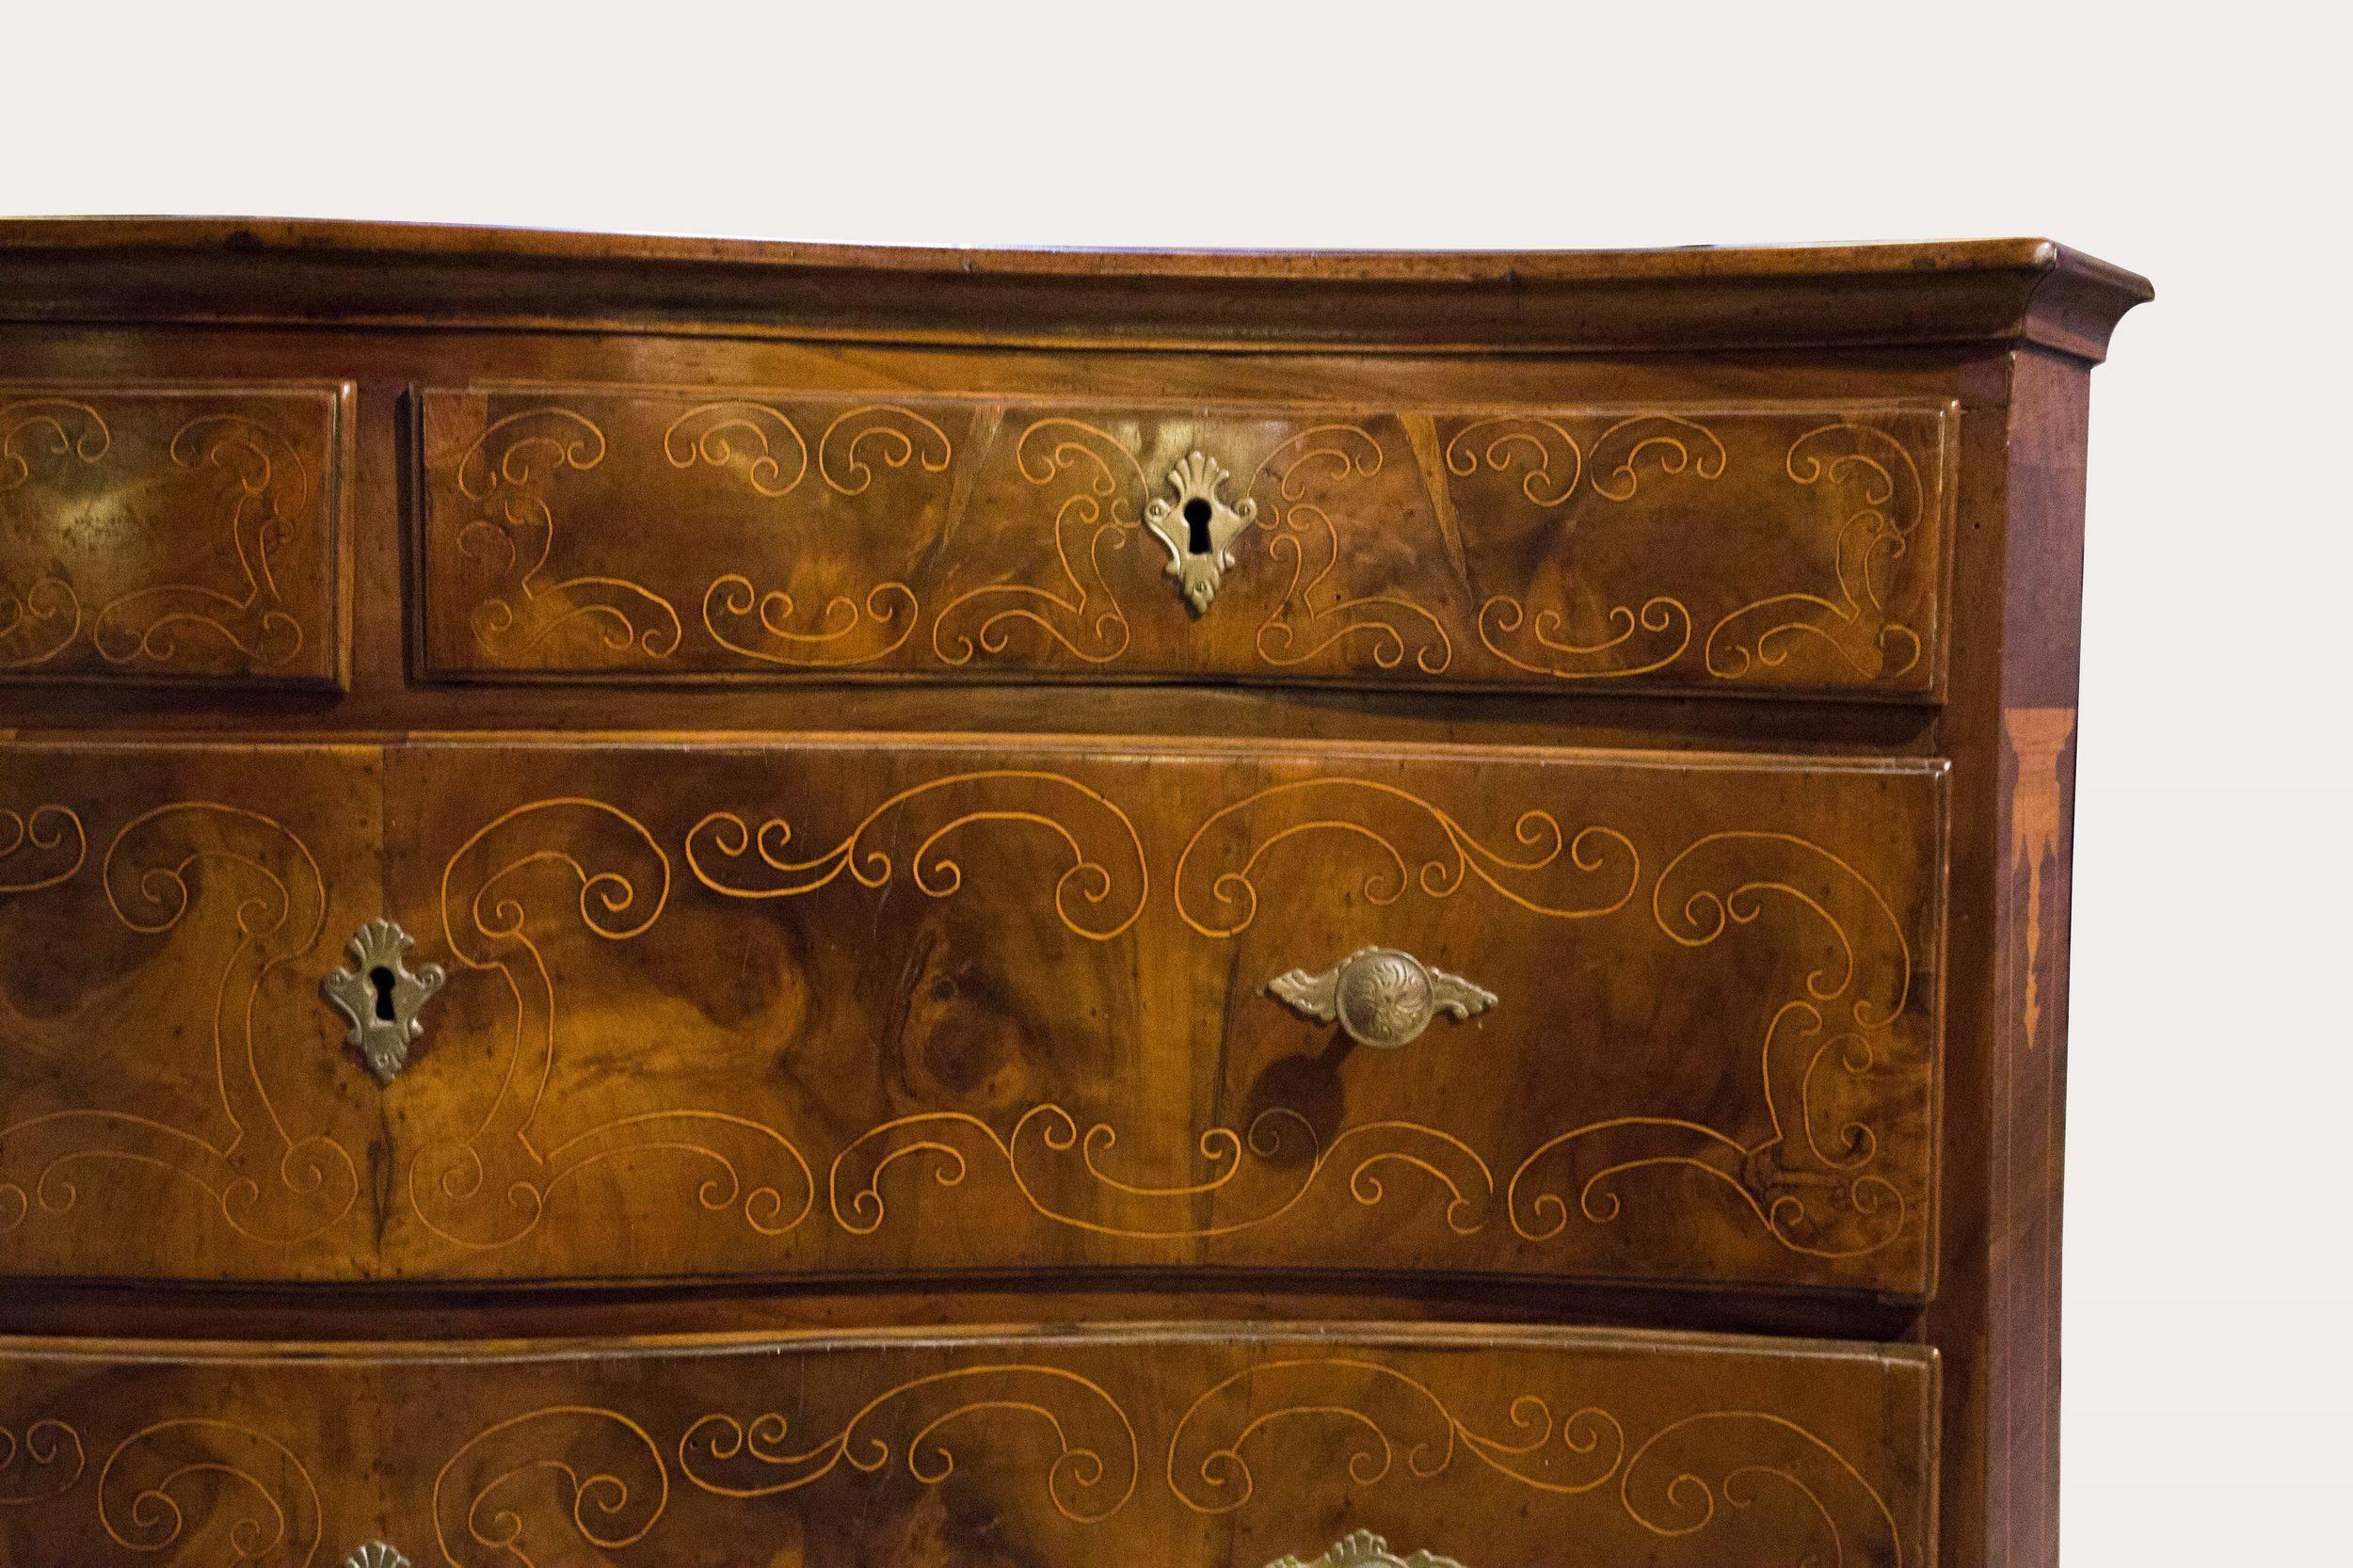 Rococo 18th Century Italian Naples Inlaid Walnut Chest of Drawers, circa 1750 For Sale